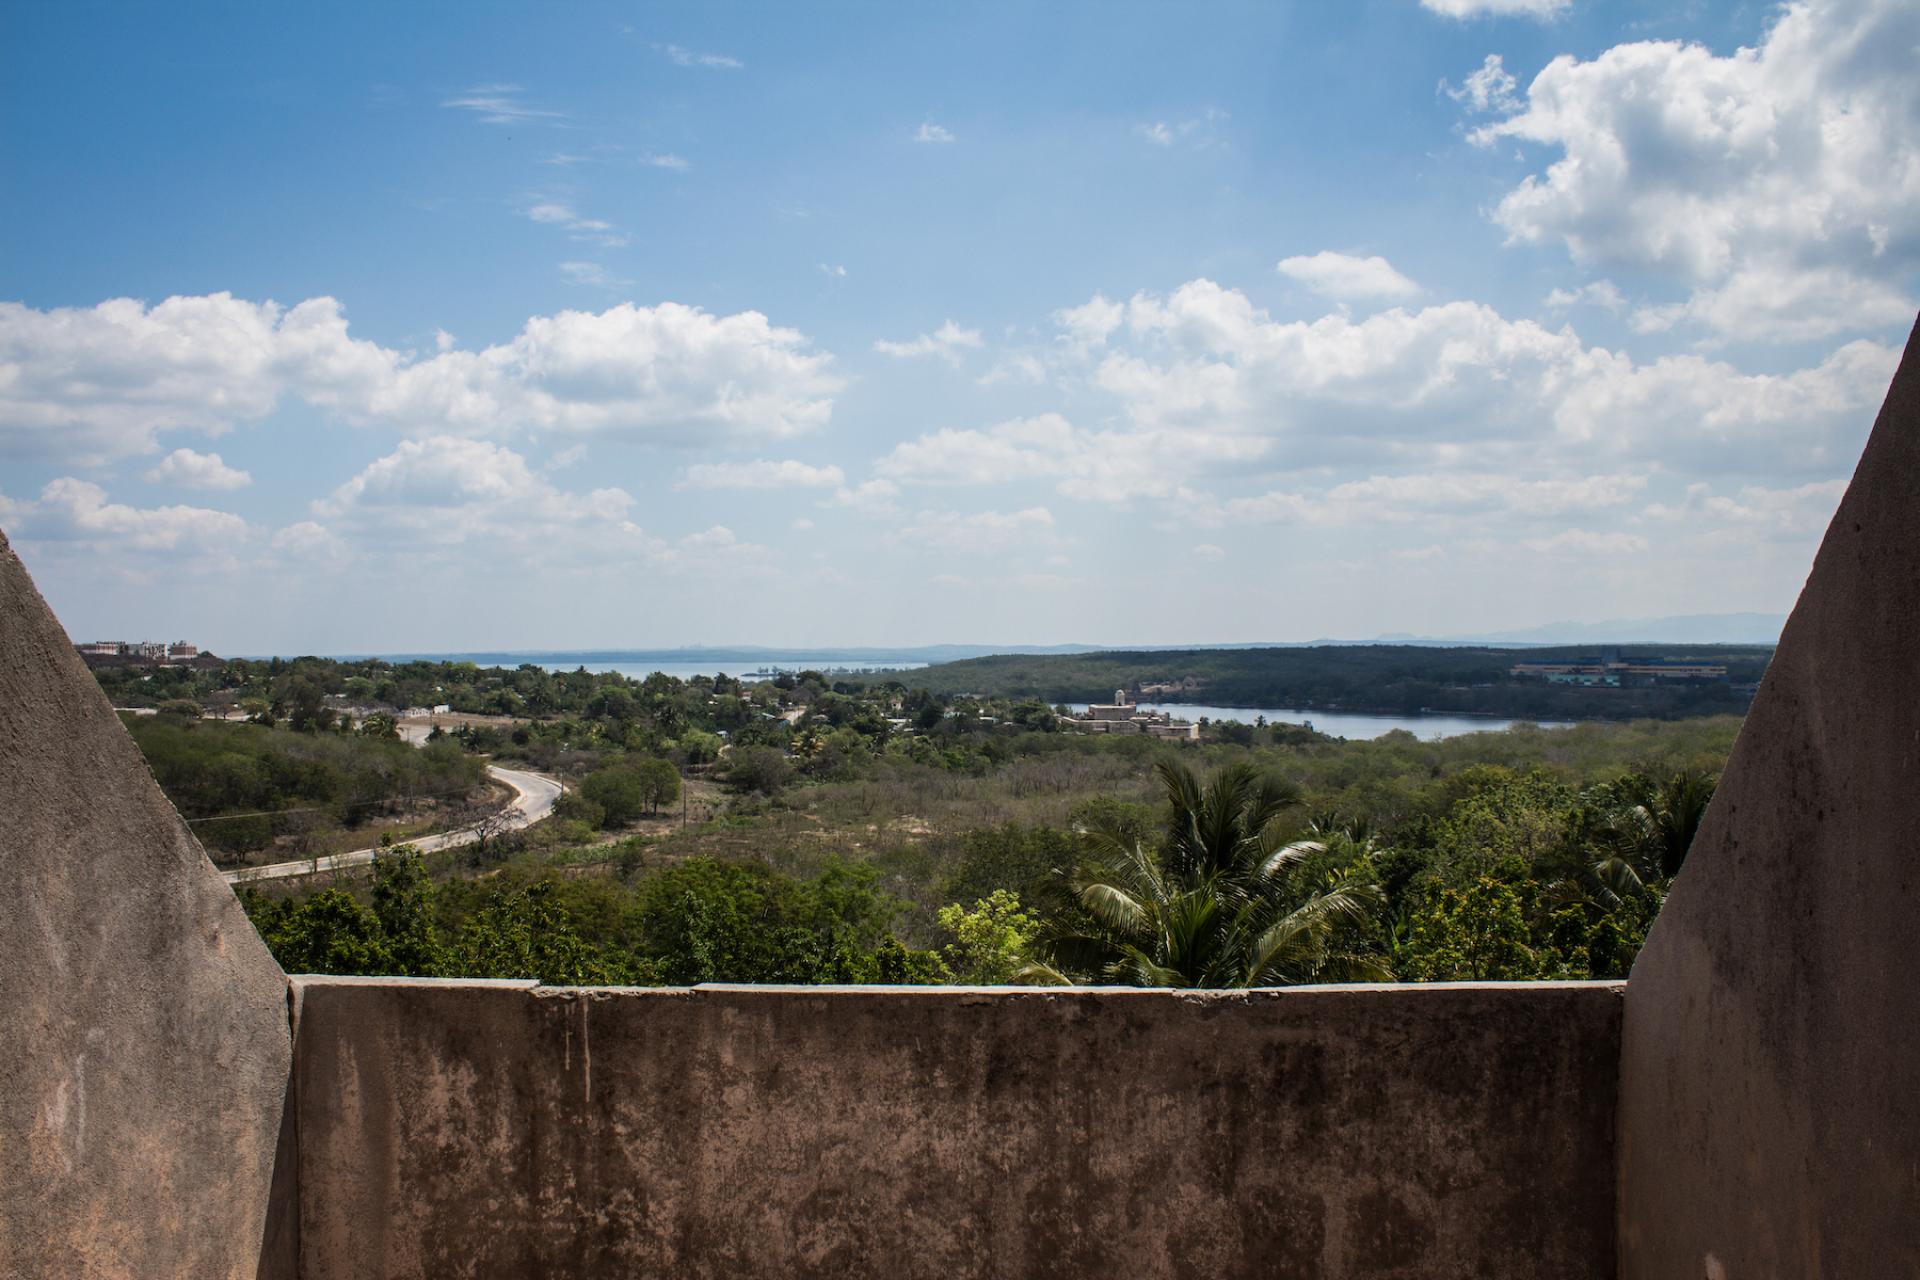 Looking east from Ciudad Nuclear, where a narrow strait connects the Caribbean to the inland Bay of Cienfuegos.